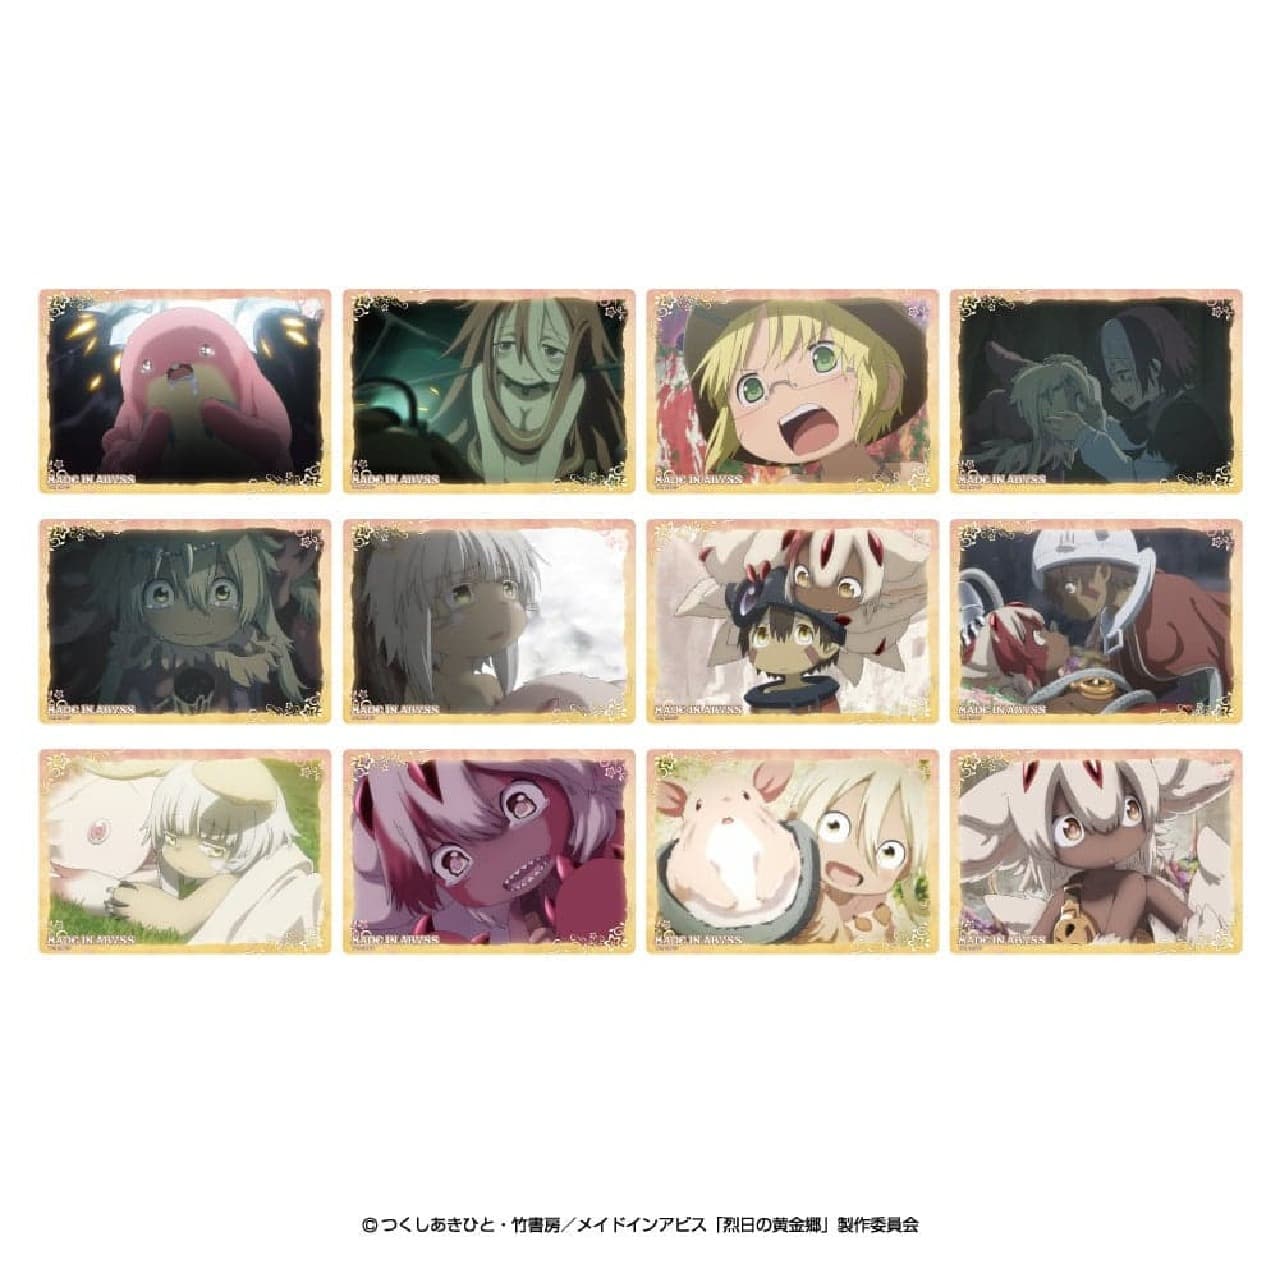 Village Vanguard's "Made in Abyss" Limited Edition Aurora Acrylic Panels Available for Pre-Order Online May 2, 2024; Anime Merchandise Also Available at Stores the Same Day Image 3